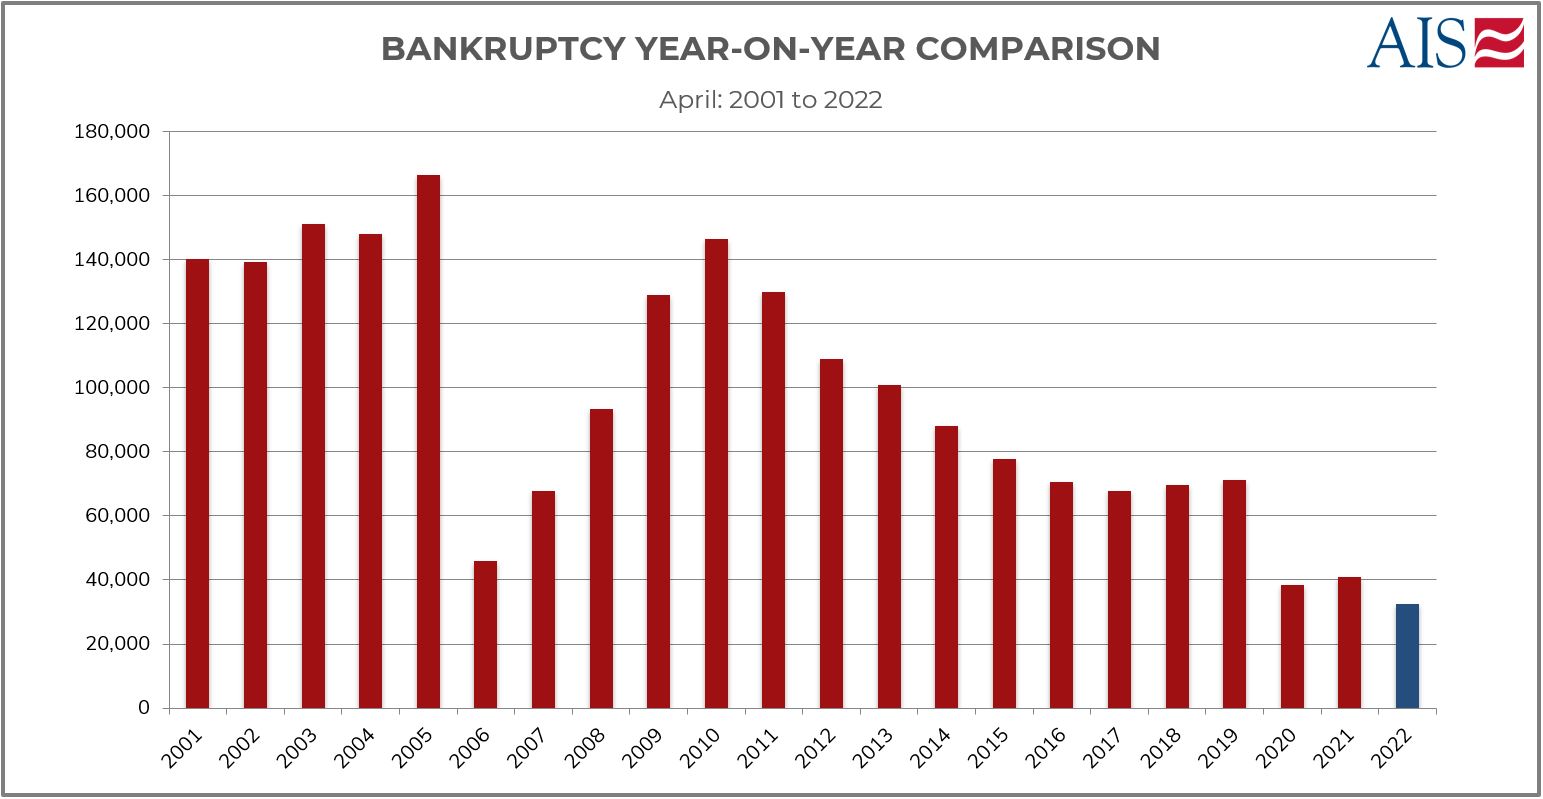 AIS INSIGHT_APRIL 2022_BANKRUPTCY YEAR ON YEAR COMPARISON-1